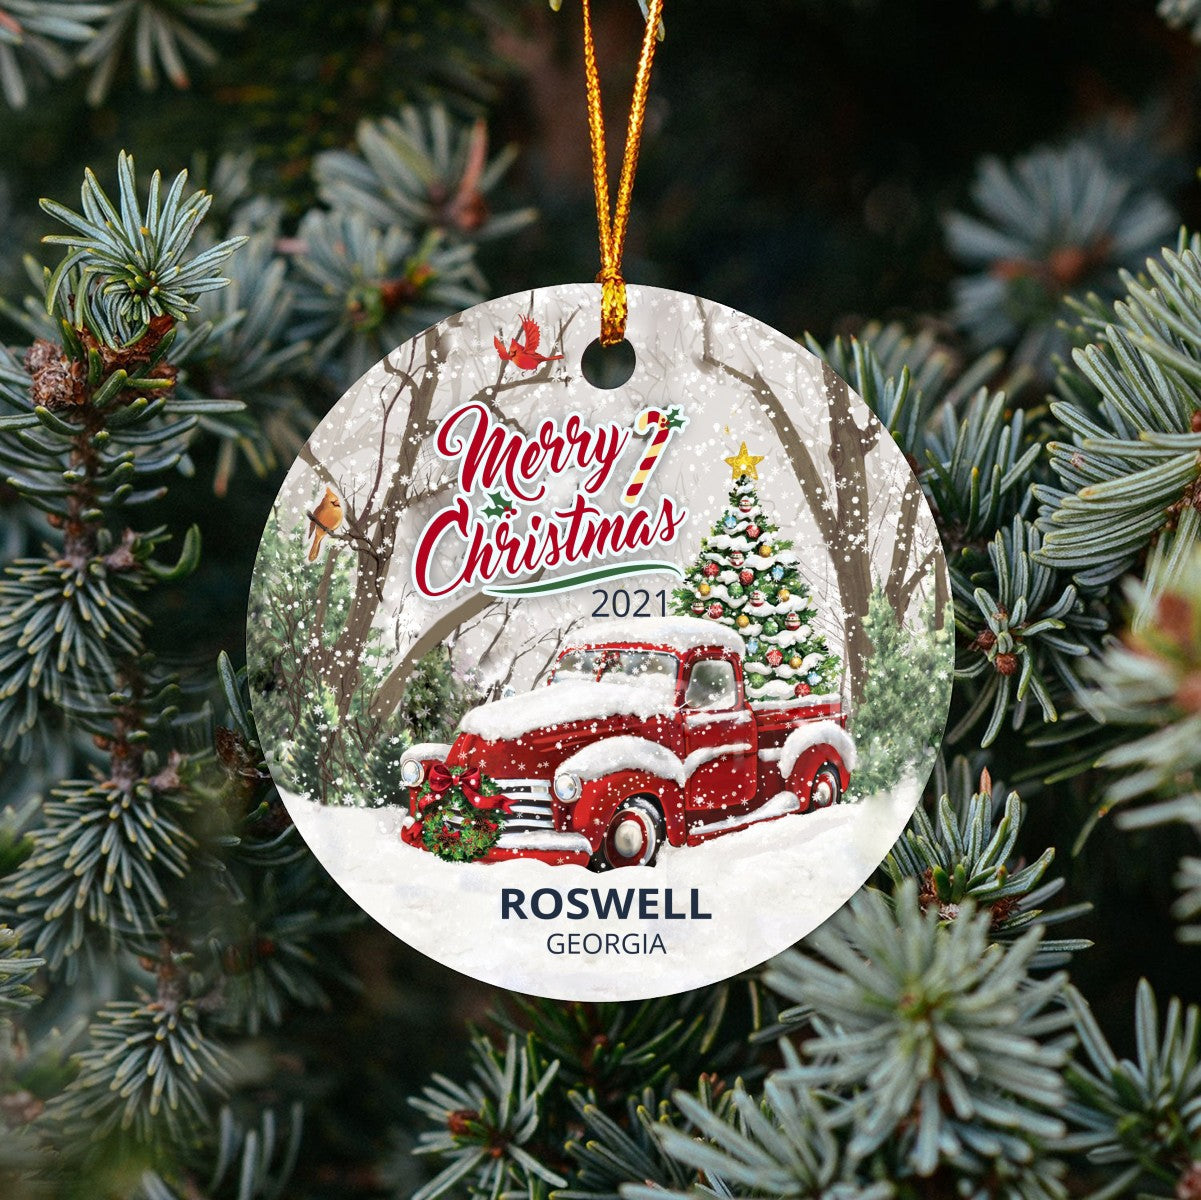 Christmas Tree Ornaments Roswell - Ornament Customize With Name City And State Roswell Georgia GA - Red Truck Xmas Ornaments 3'' Plastic Gift For Family, Friend And Housewarming